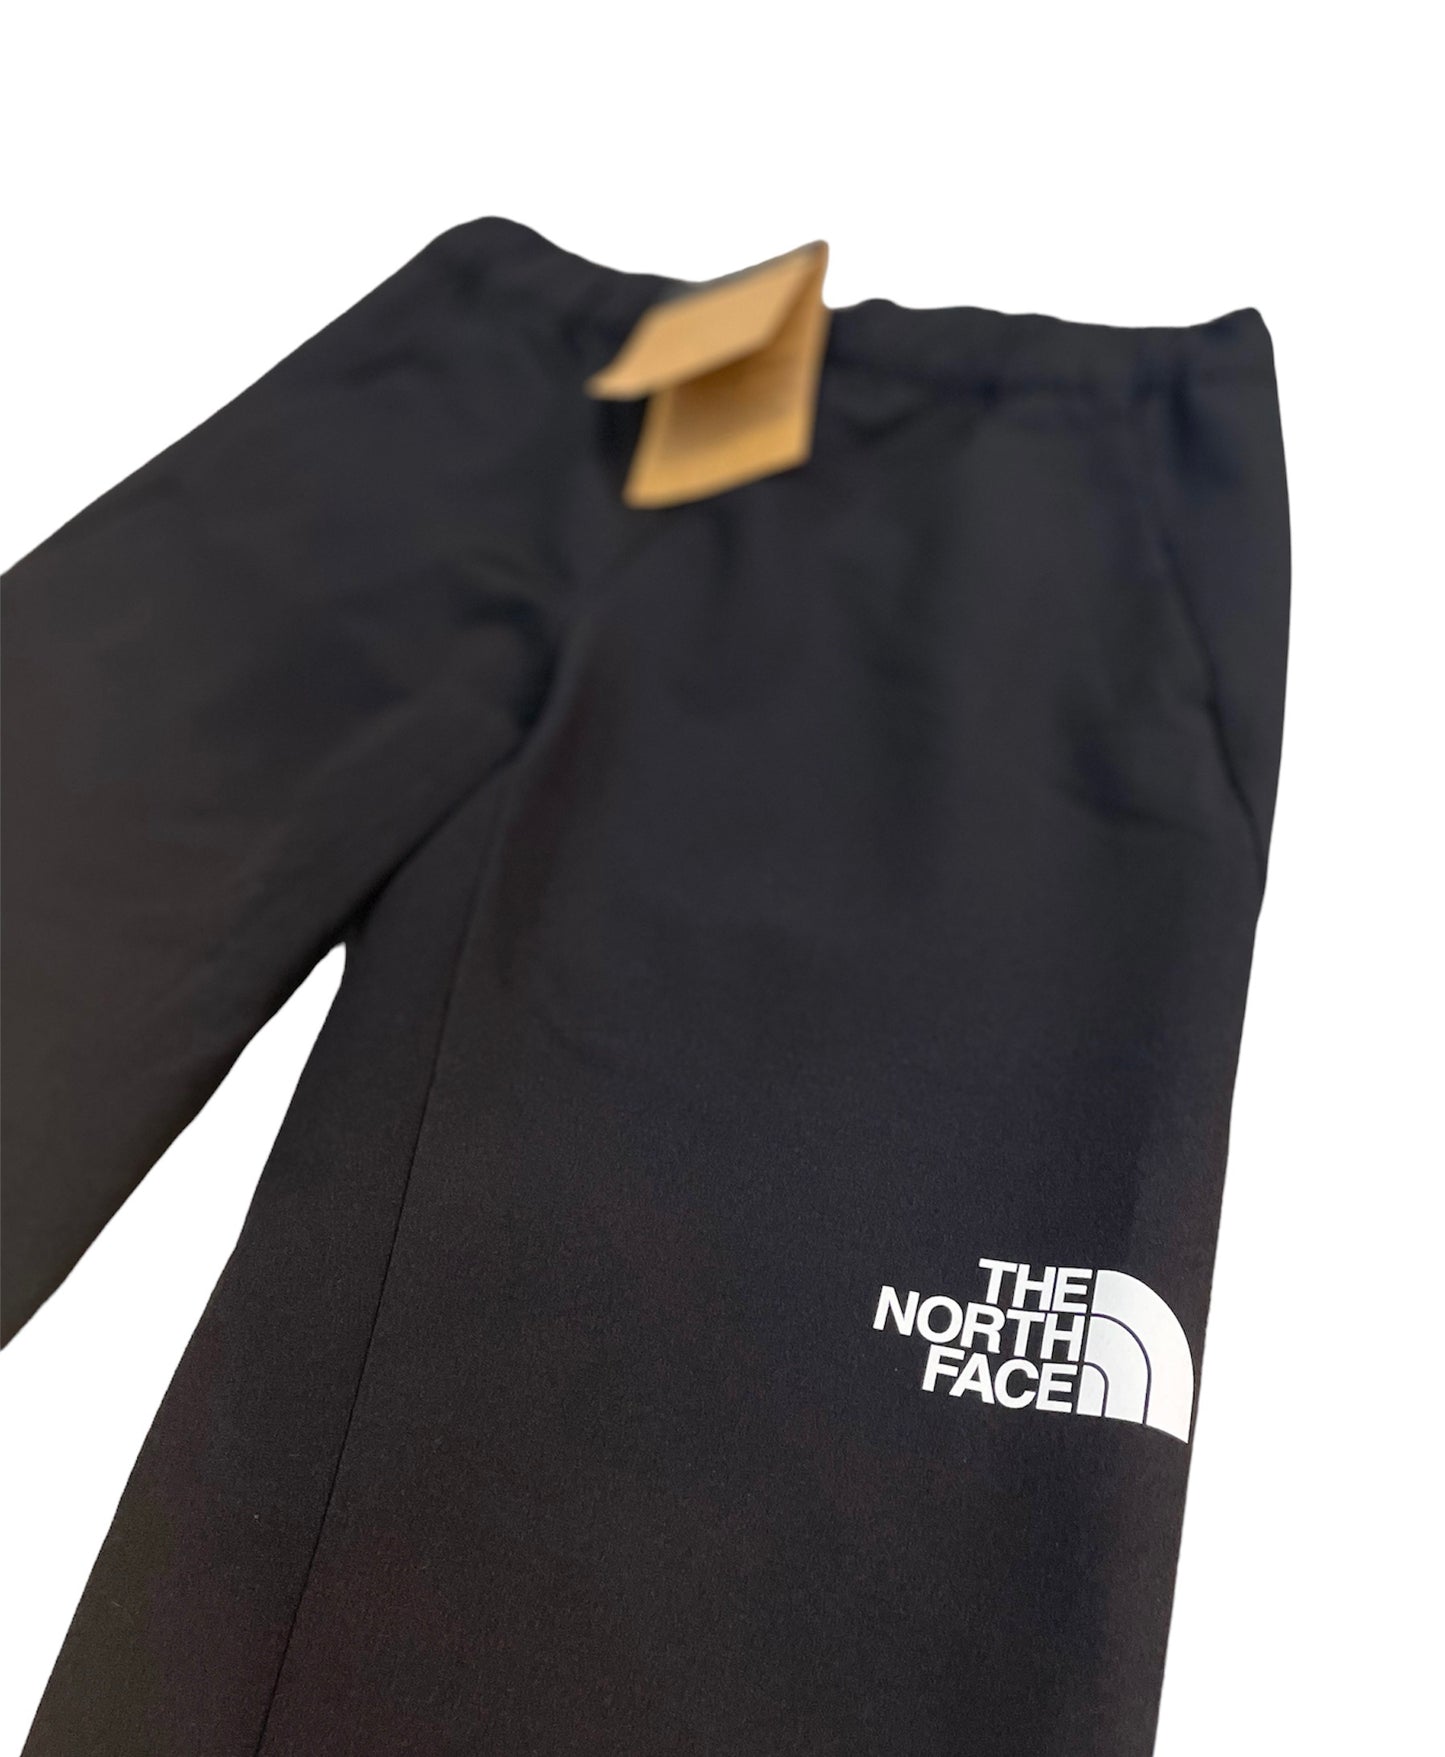 THE NORTH FACE LAB WIND BOTTOMS - BLACK